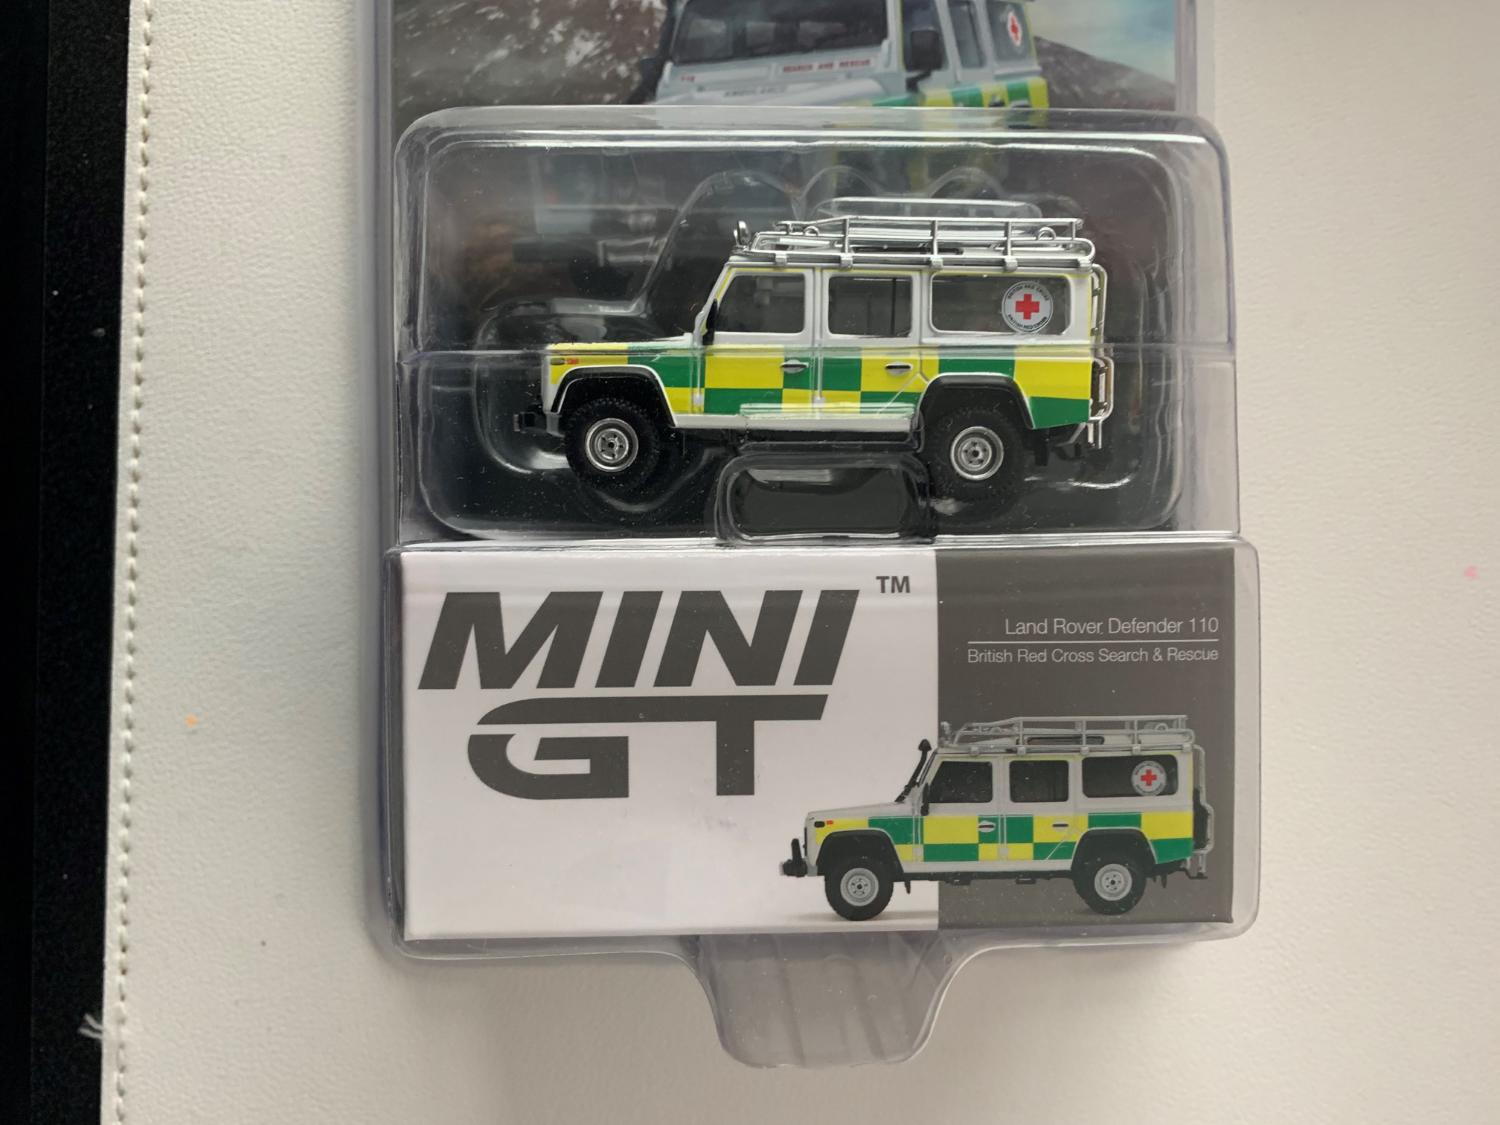 Land Rover Defender 110, British Red Cross Search & Rescue, 1:64 scale model from MINI GT